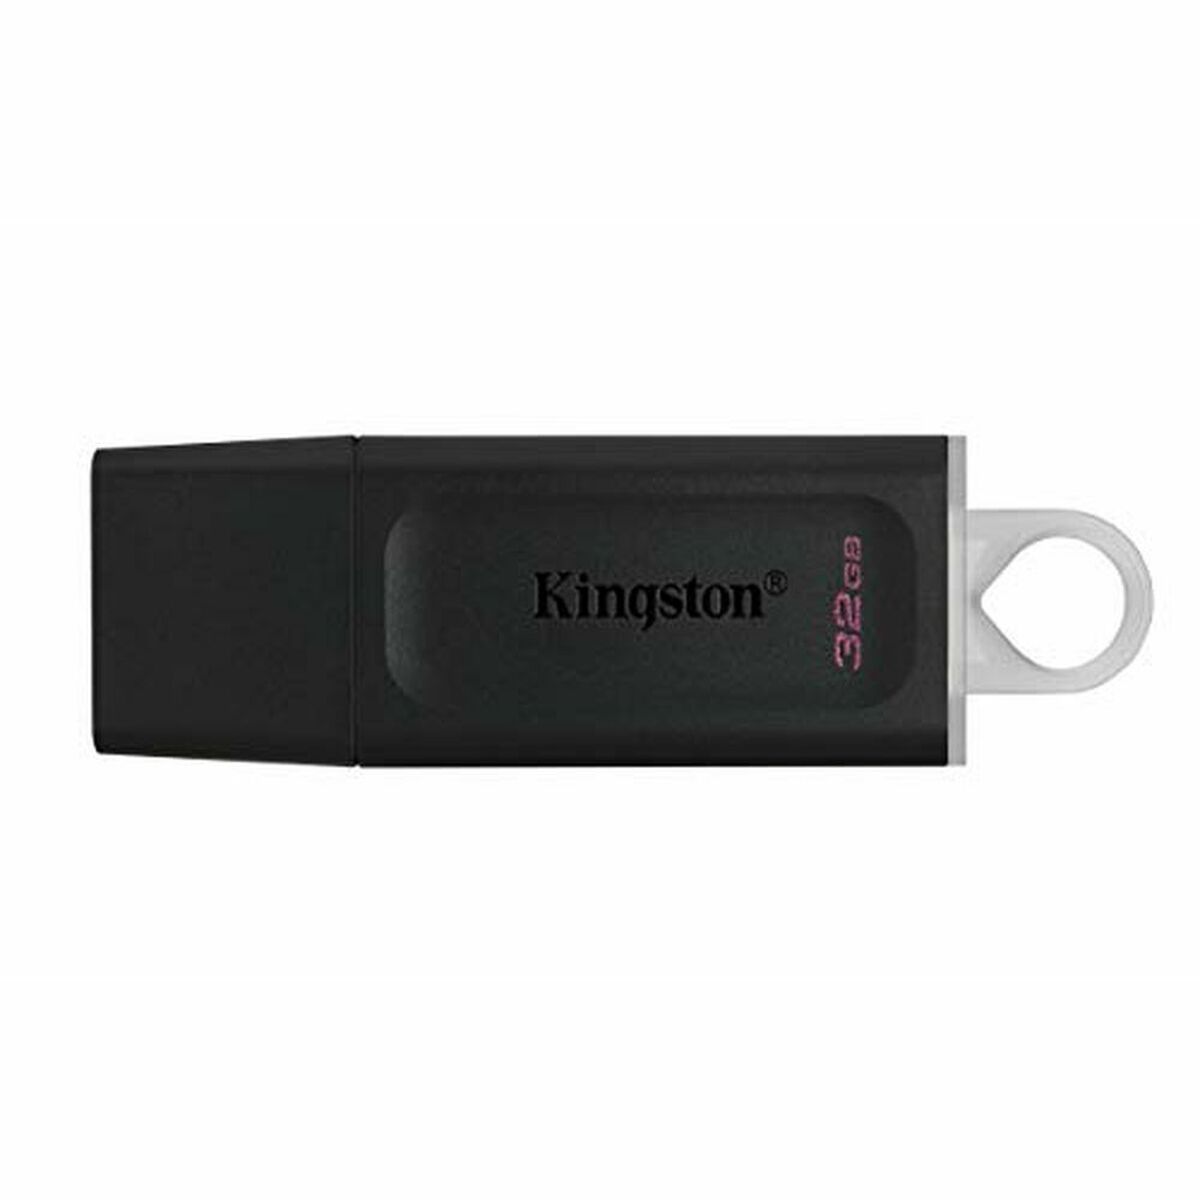 Pendrive Kingston DTX/32GB Black Grey 32 GB, Kingston, Computing, Data storage, pendrive-kingston-dtx-32gb-black-grey-32-gb, Brand_Kingston, category-reference-2609, category-reference-2803, category-reference-2817, category-reference-t-19685, category-reference-t-19909, category-reference-t-21355, computers / components, Condition_NEW, Price_20 - 50, Teleworking, RiotNook